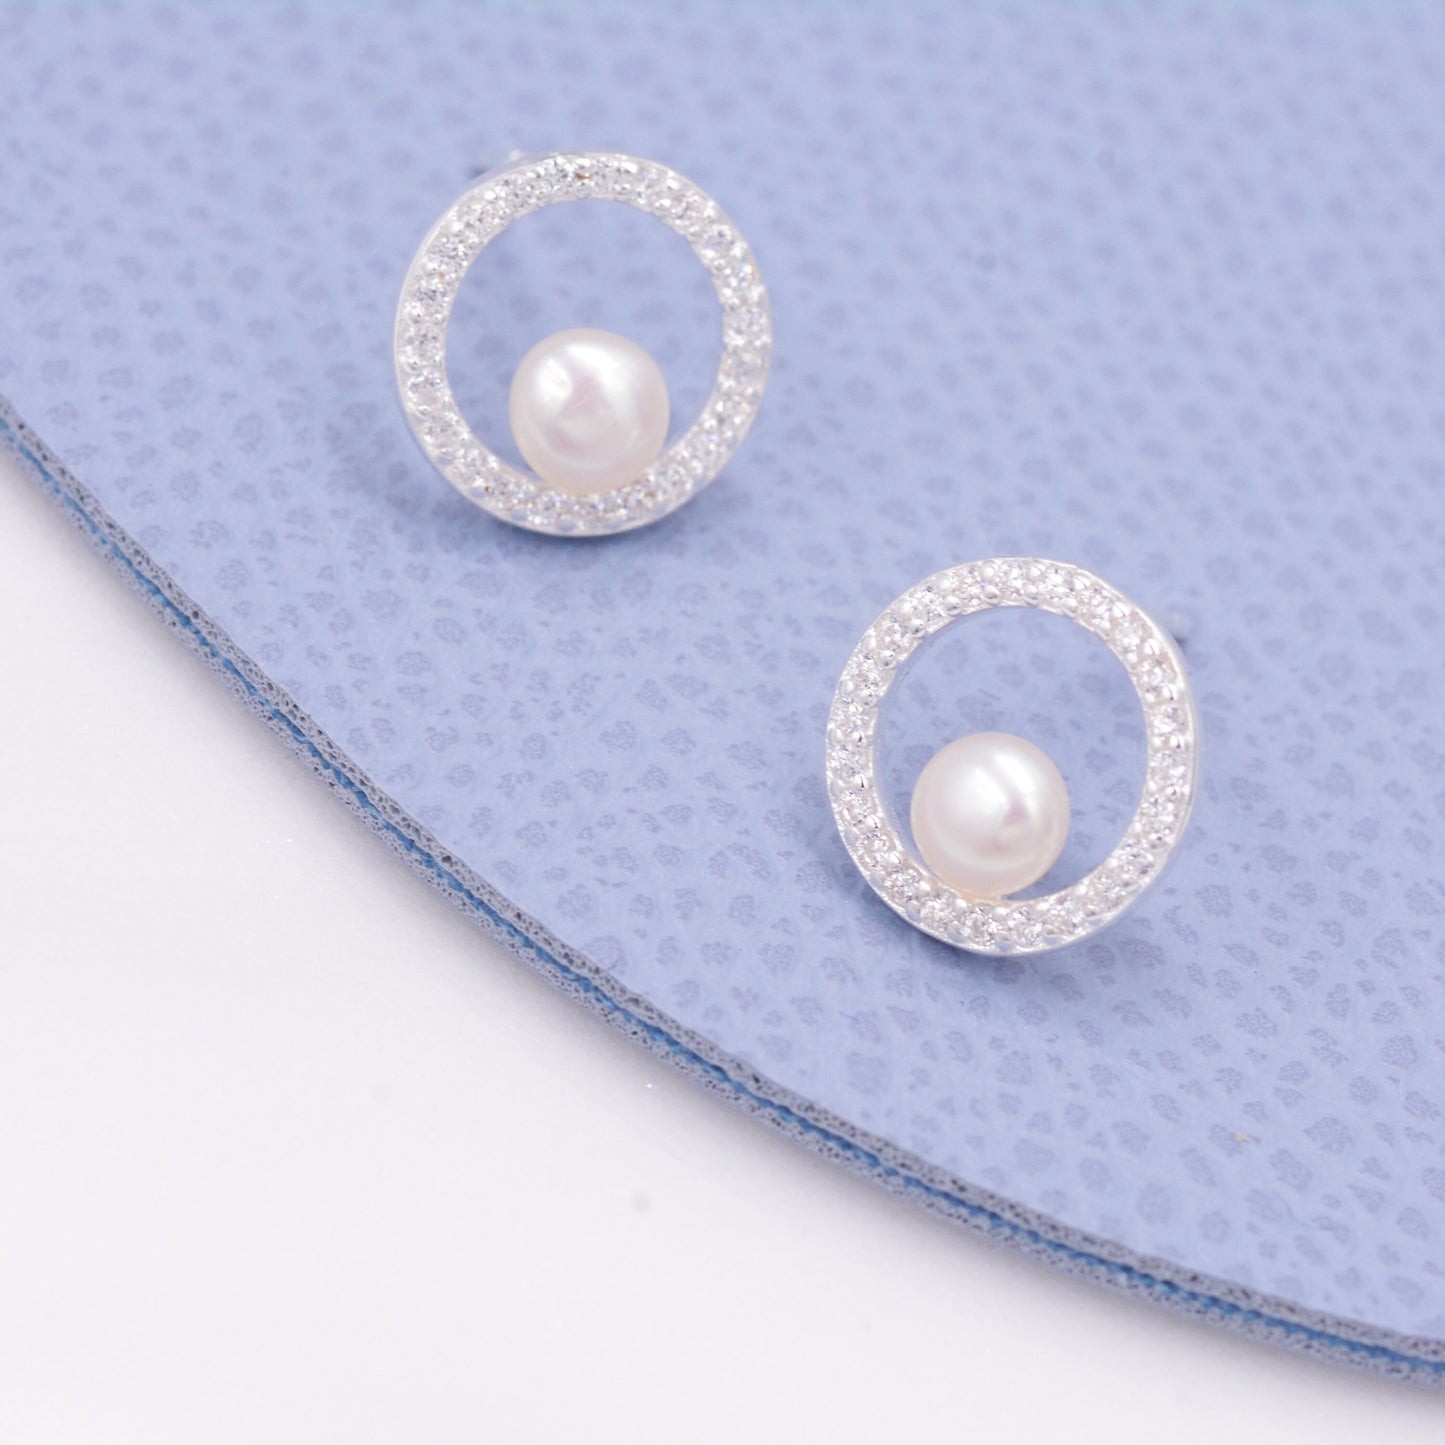 Pave Circle with Pearls Stud Earrings in Sterling Silver, CZ Pave, Genuine Freshwater Pearls